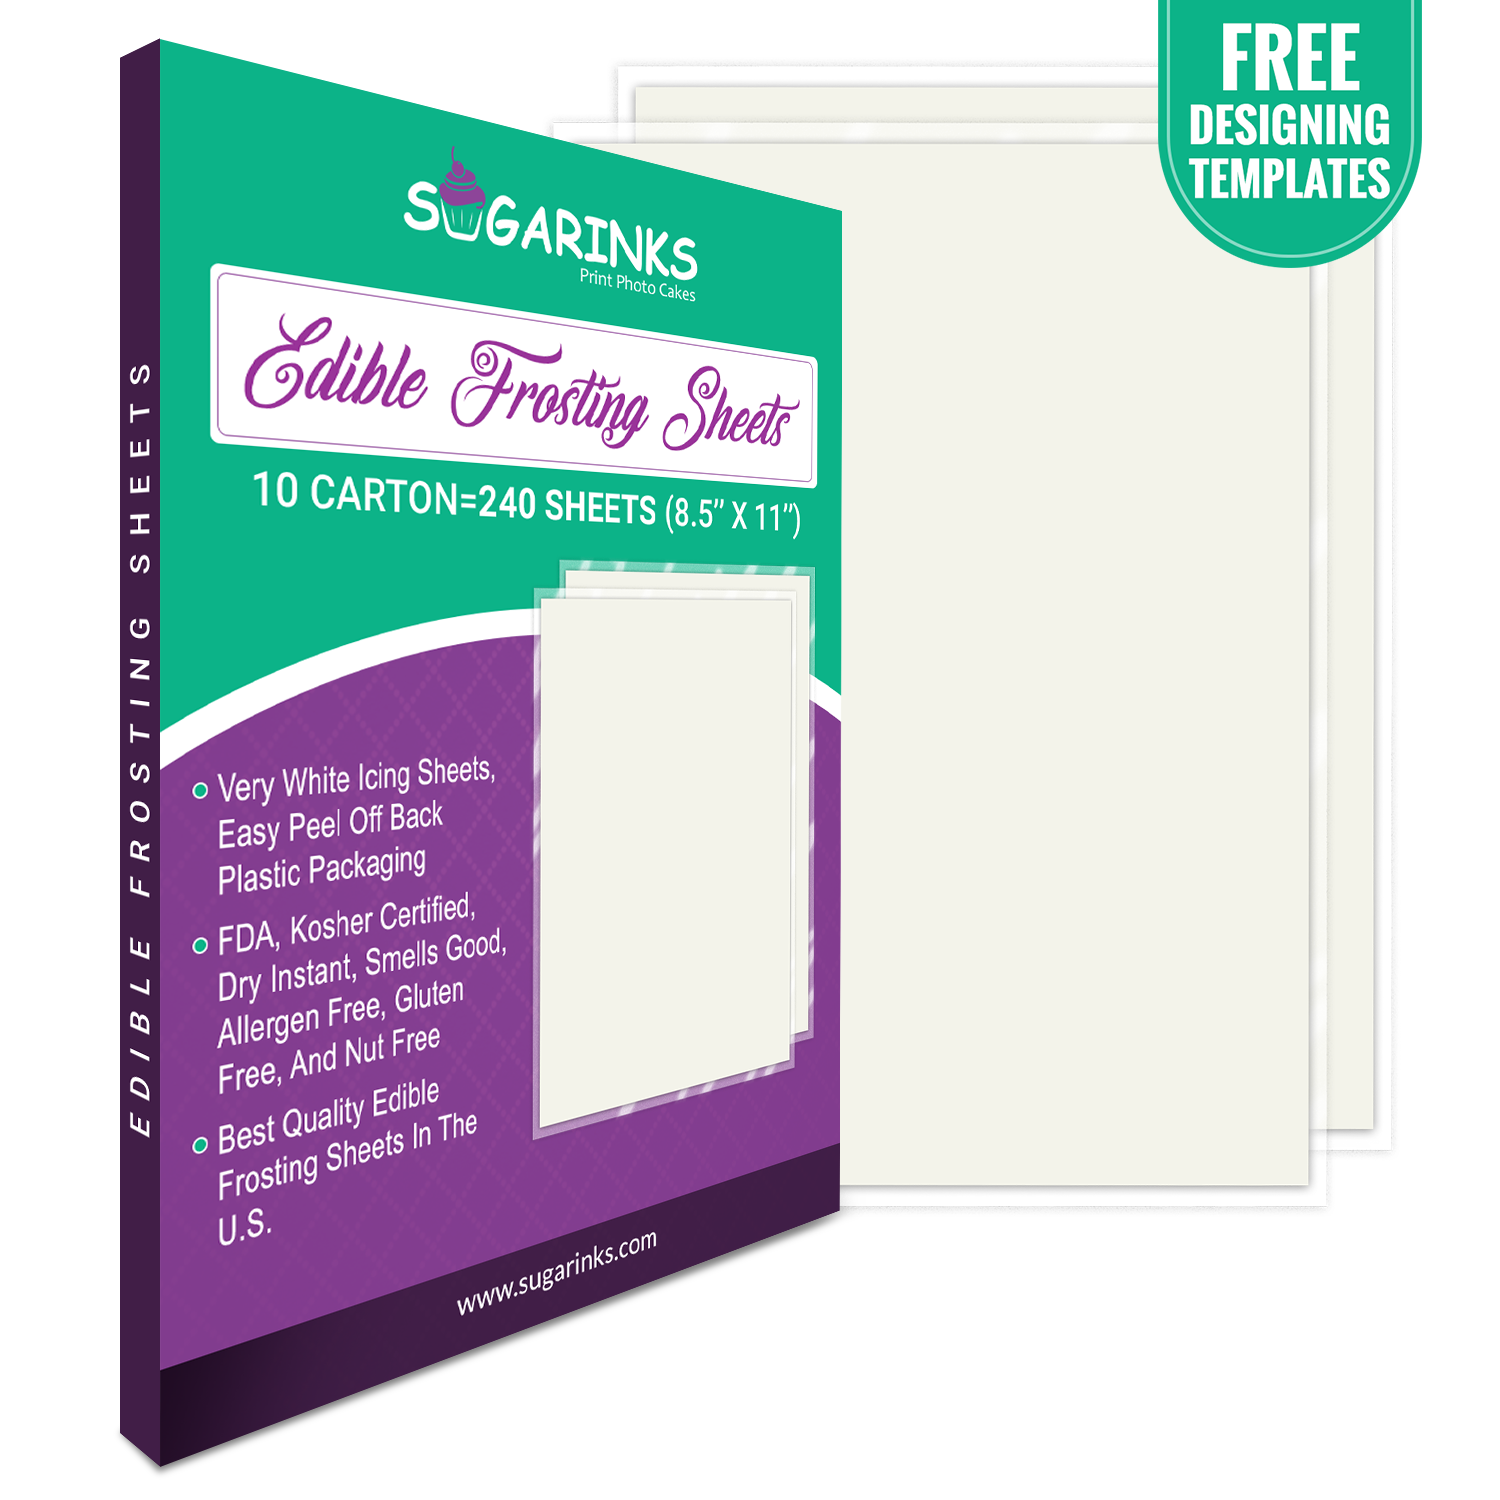 CARTON Pack 240 Sheets of Premium Quality Blank Frosting Sheets Letter Size (8.5”X11”) 